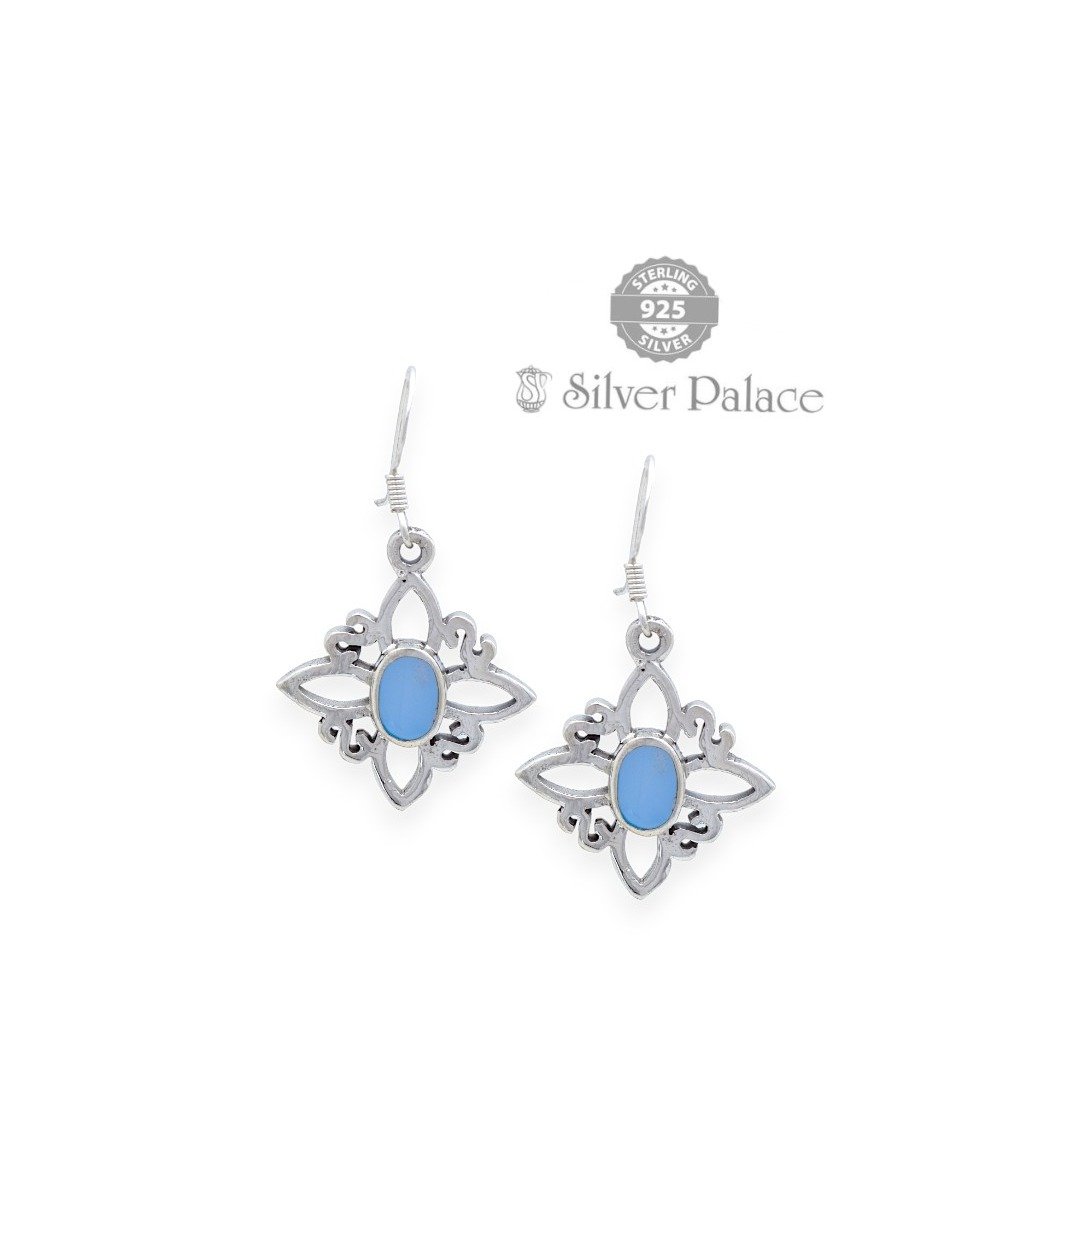 PURE SILVER WITH FLOWER DESIGN EARRINGS TRISHE COLLECTION